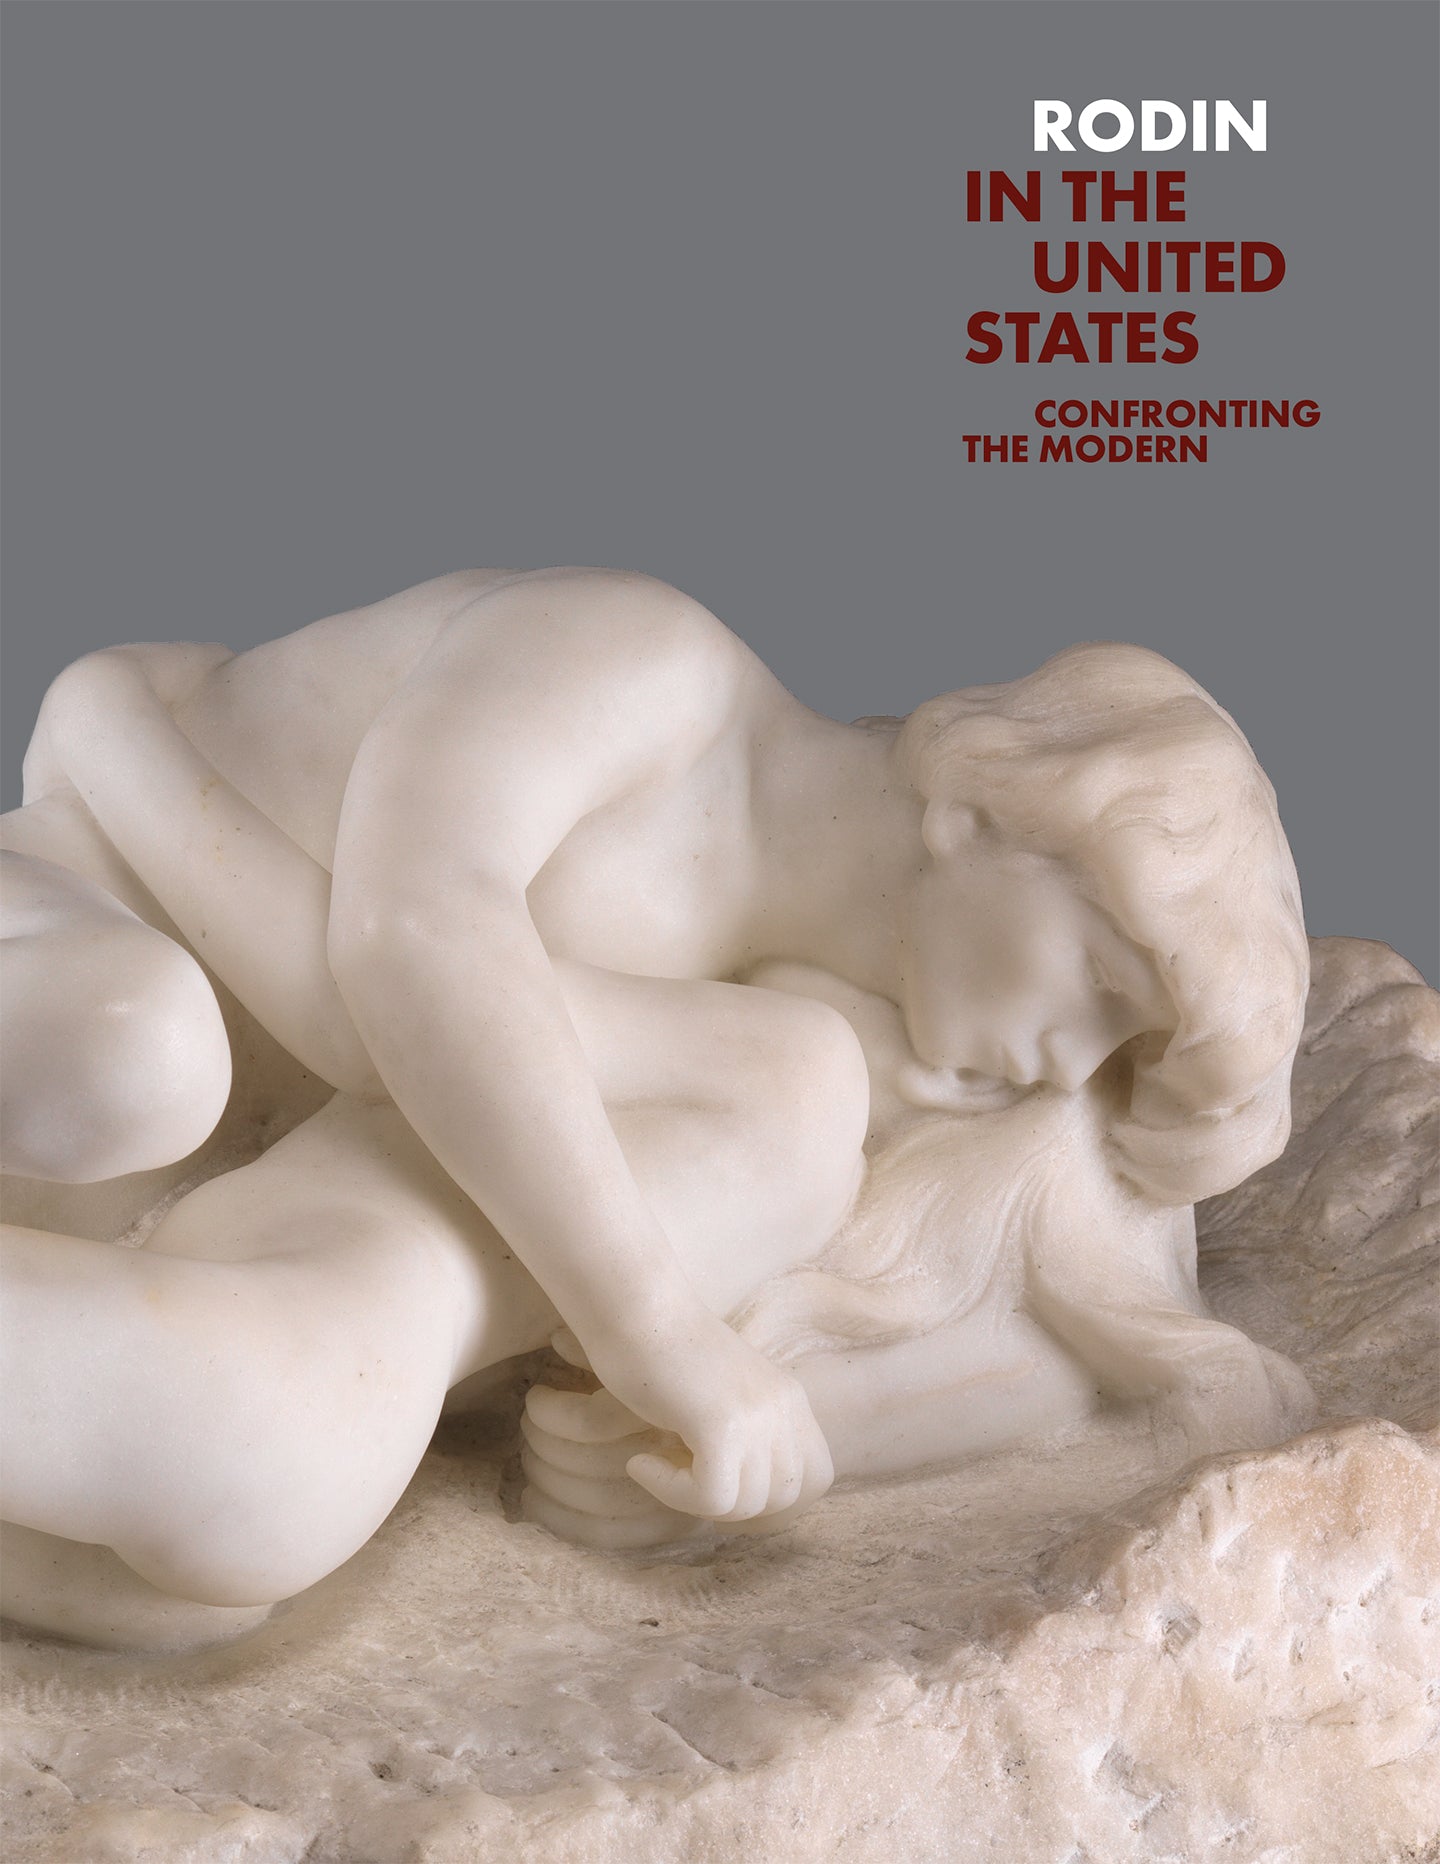 Rodin in the United States